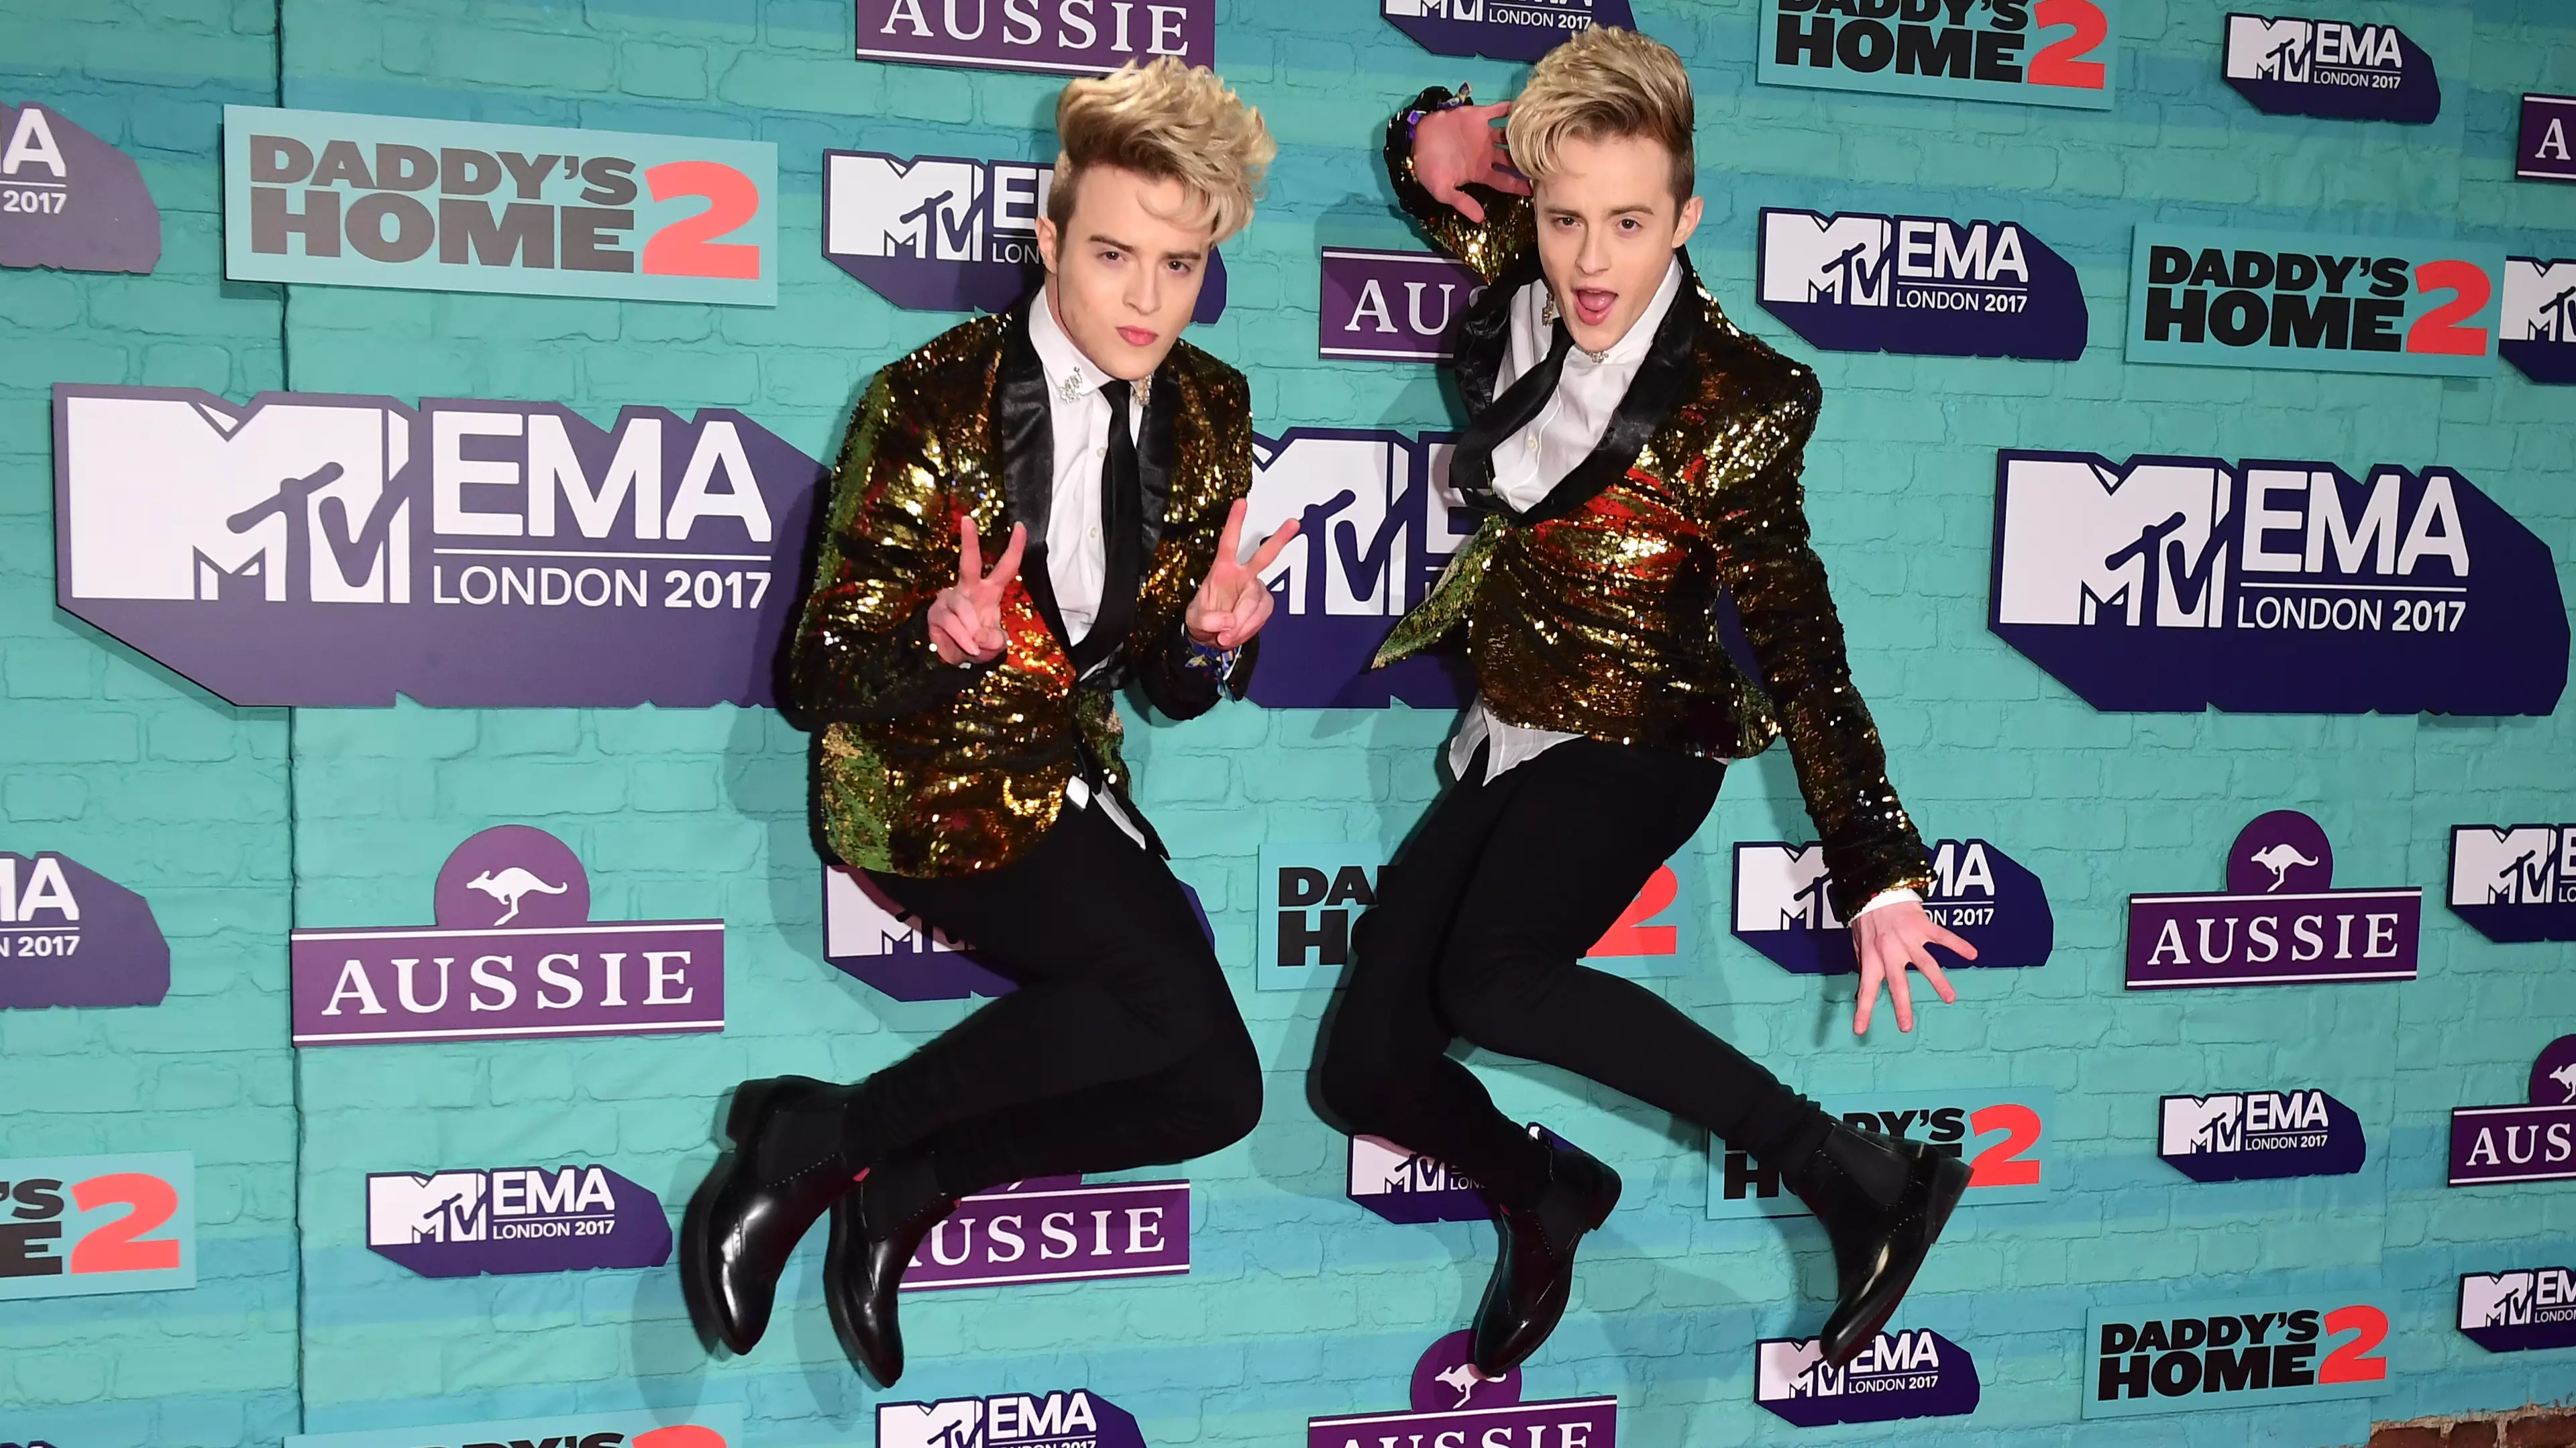 Jedward Claim They're Going To Help Their Friend Have Twins Through IVF